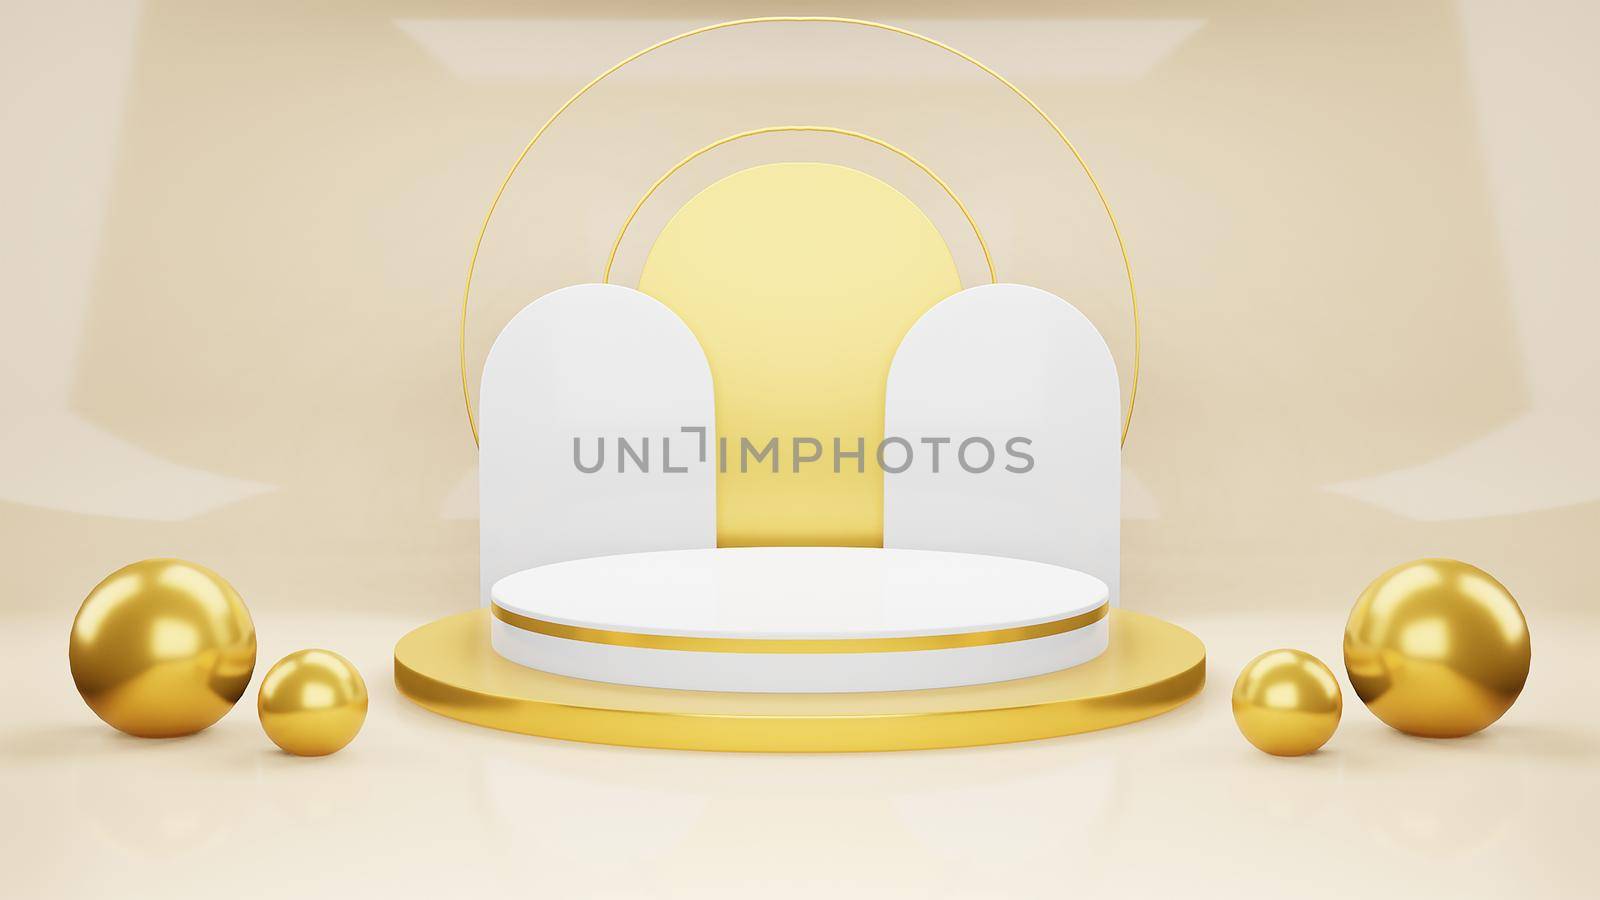 Minimal cosmetic background for product presentation. Cosmetic bottle podium and gold podium on gray color background. 3d render illustration. Object isolate.